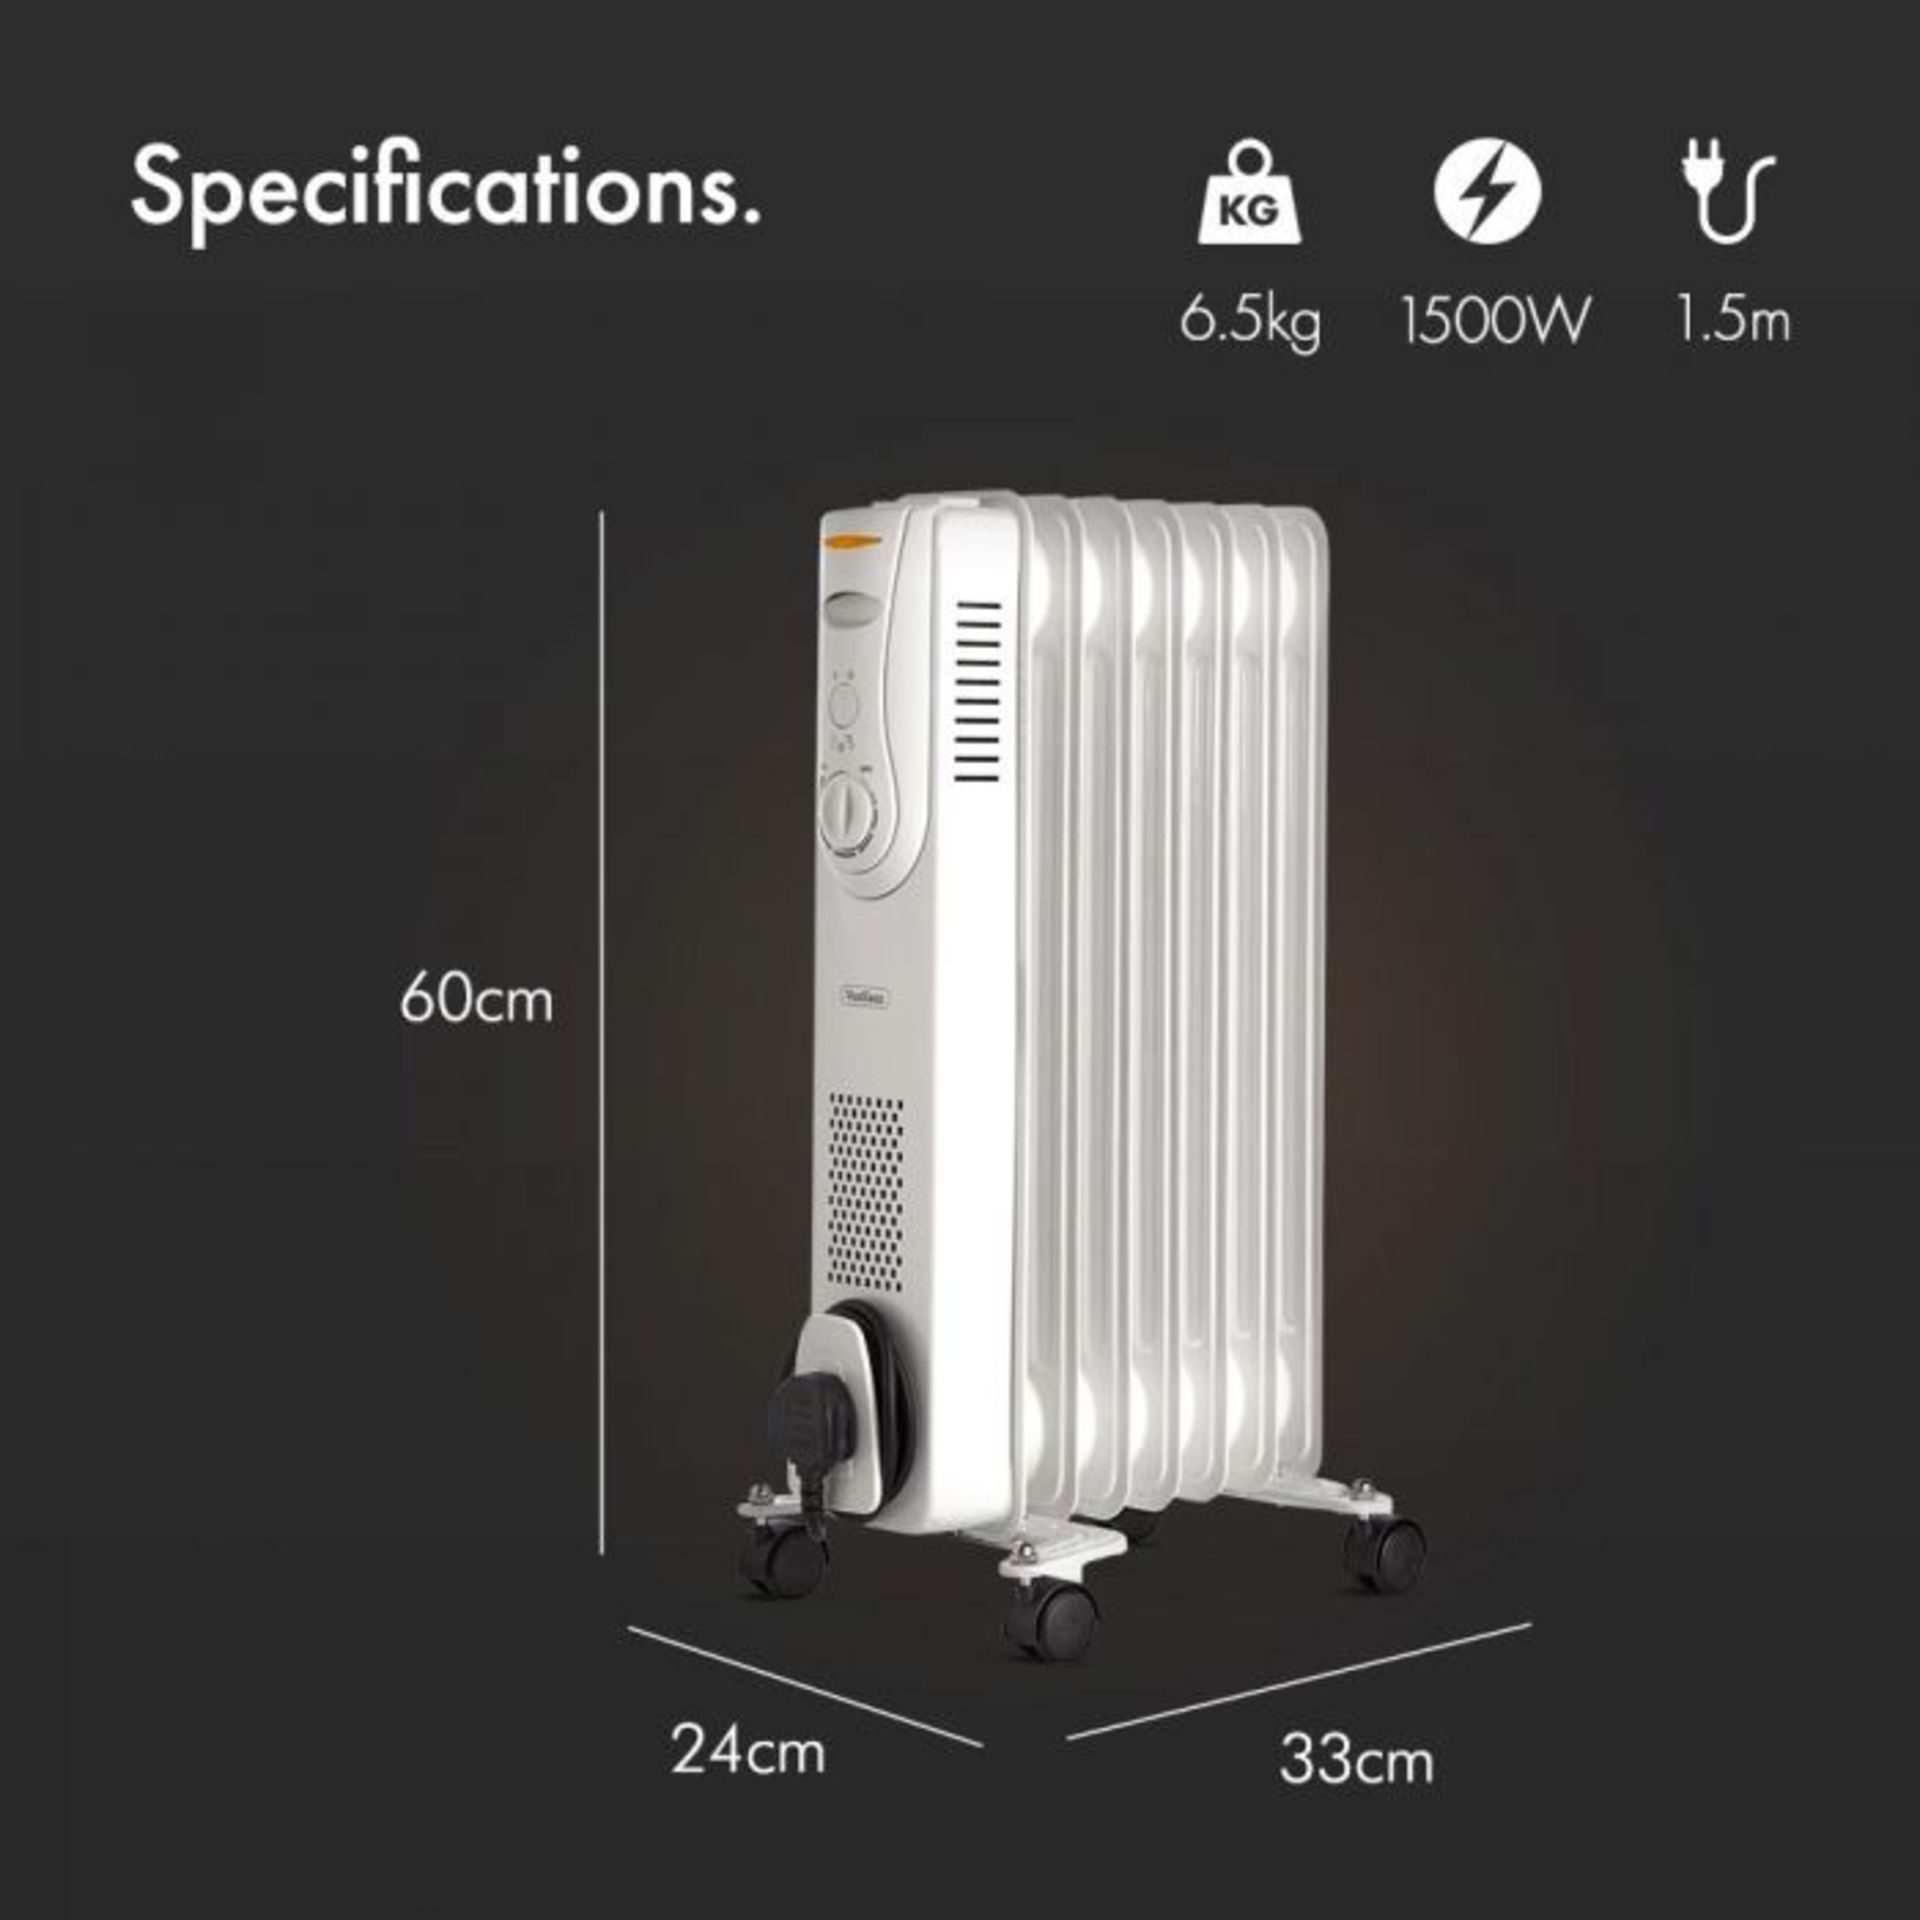 (V140) 7 Fin 1500W Oil Filled Radiator - White Powerful 1500W radiator with 7 oil-filled fins ... - Image 4 of 5